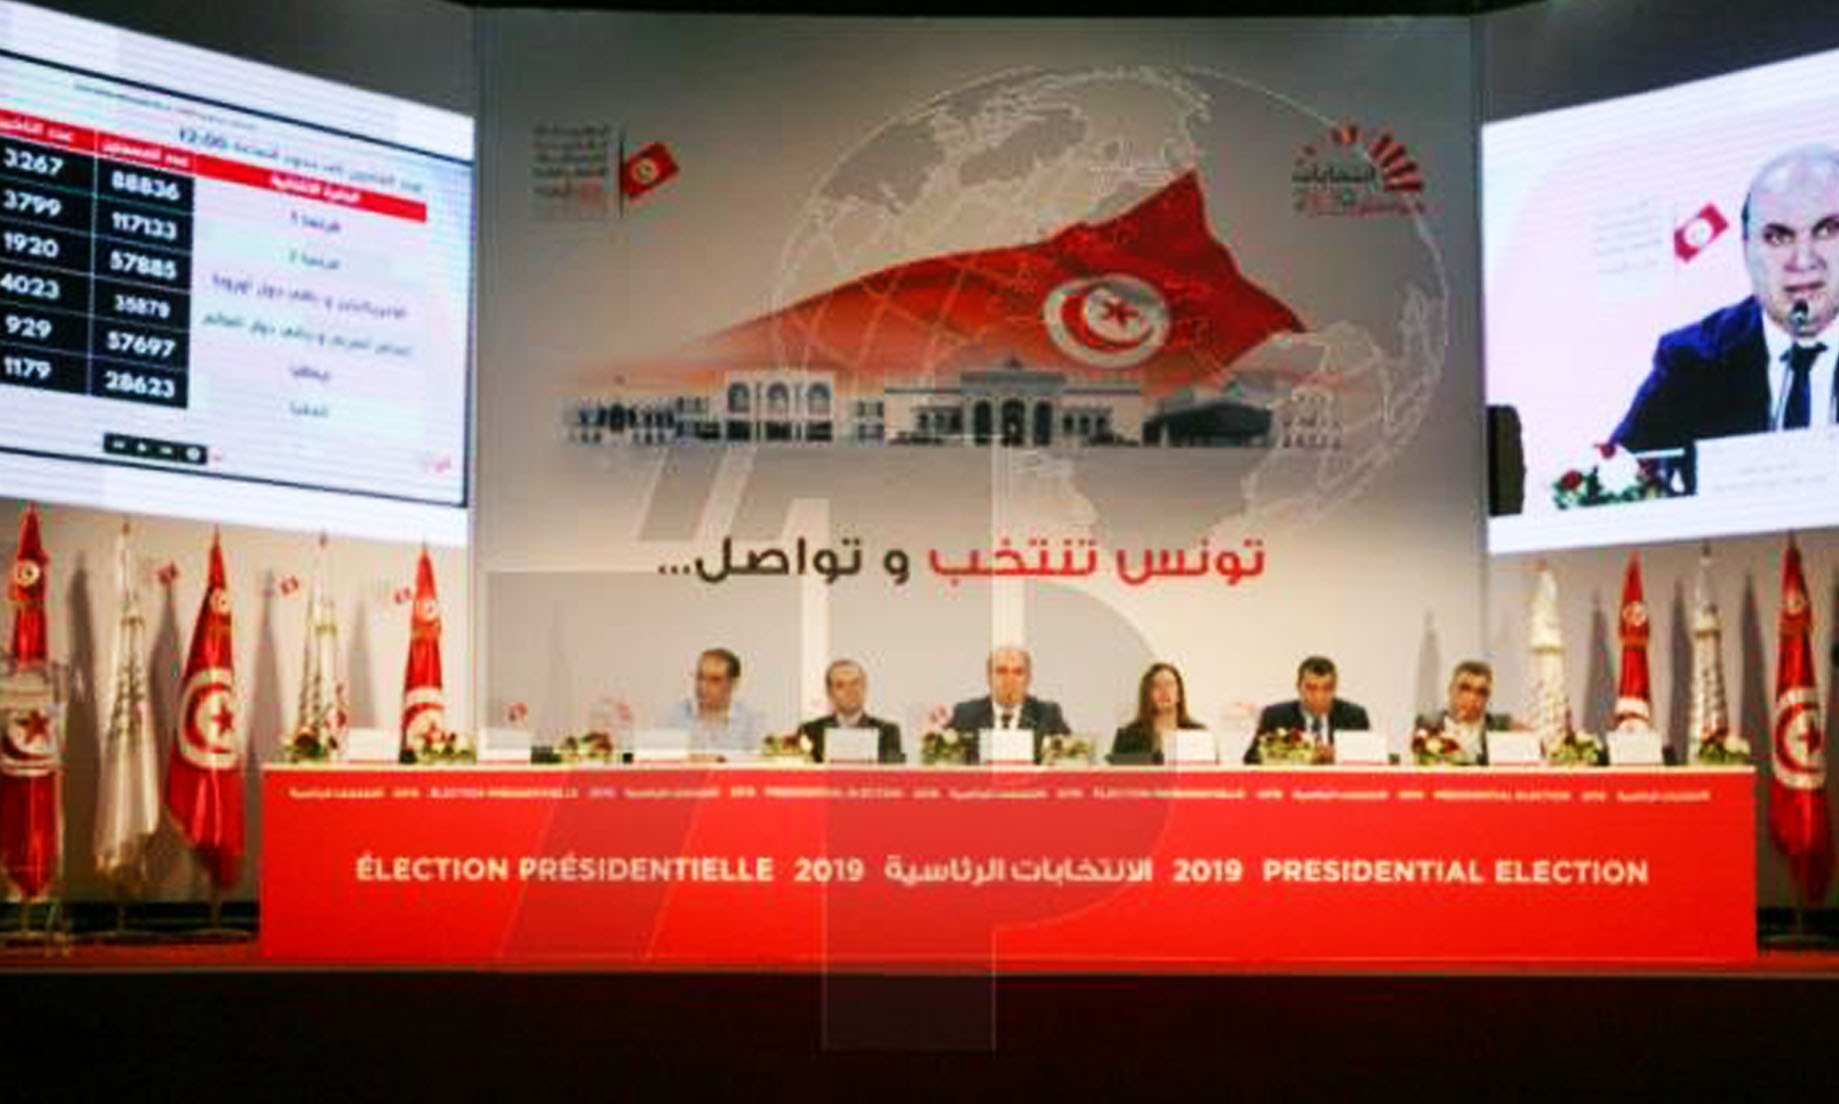 Polls open in Tunisia’s crowded presidential election